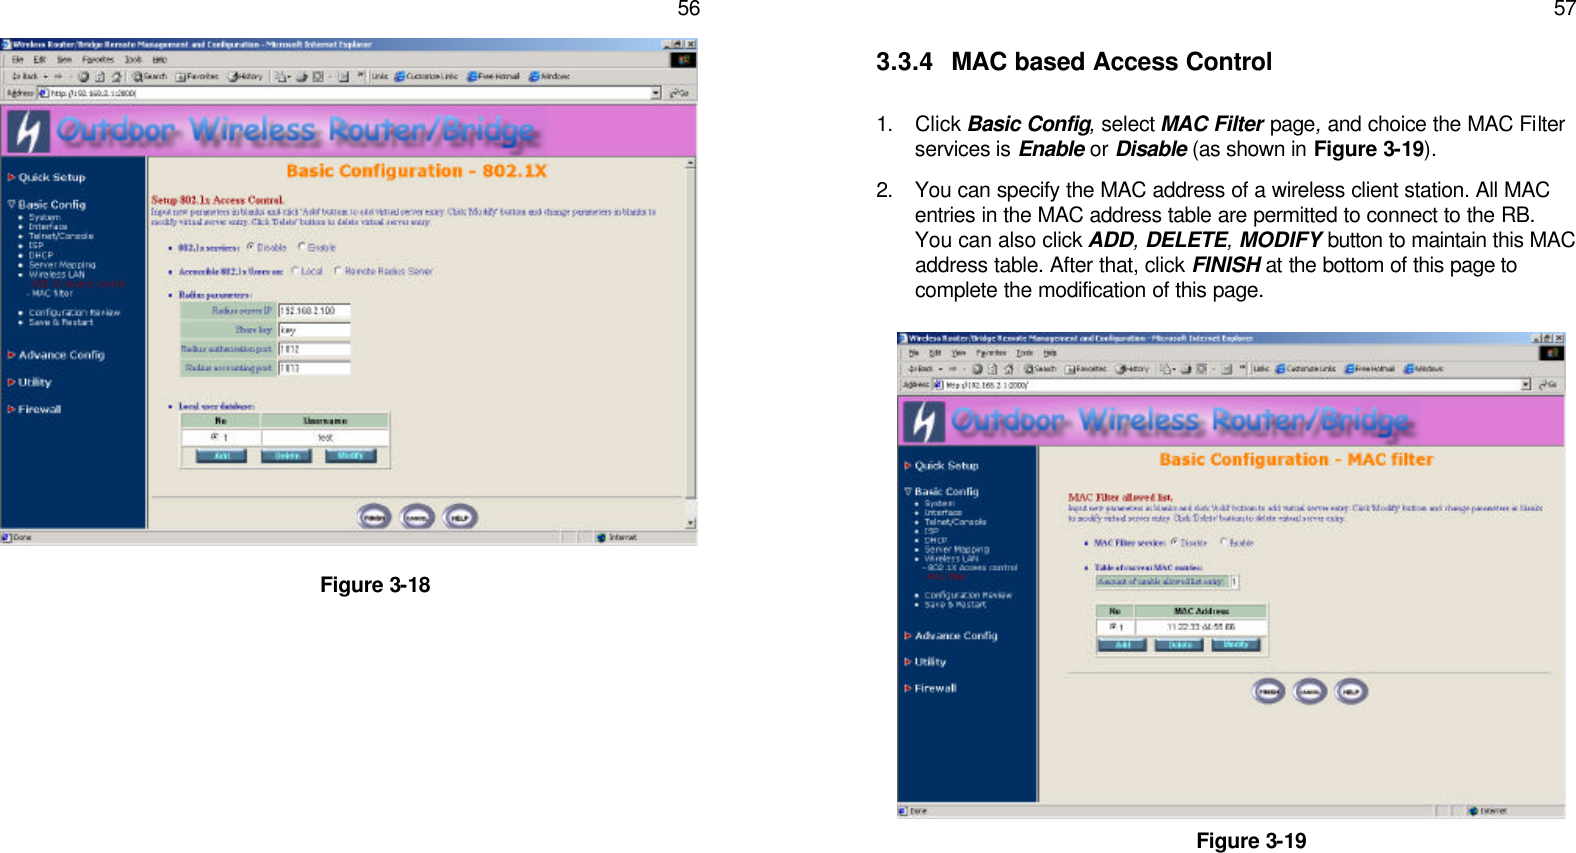   56                       Figure 3-18      57 3.3.4 MAC based Access Control  1. Click Basic Config, select MAC Filter page, and choice the MAC Filter services is Enable or Disable (as shown in Figure 3-19). 2. You can specify the MAC address of a wireless client station. All MAC entries in the MAC address table are permitted to connect to the RB. You can also click ADD, DELETE, MODIFY button to maintain this MAC address table. After that, click FINISH at the bottom of this page to complete the modification of this page.                 Figure 3-19  